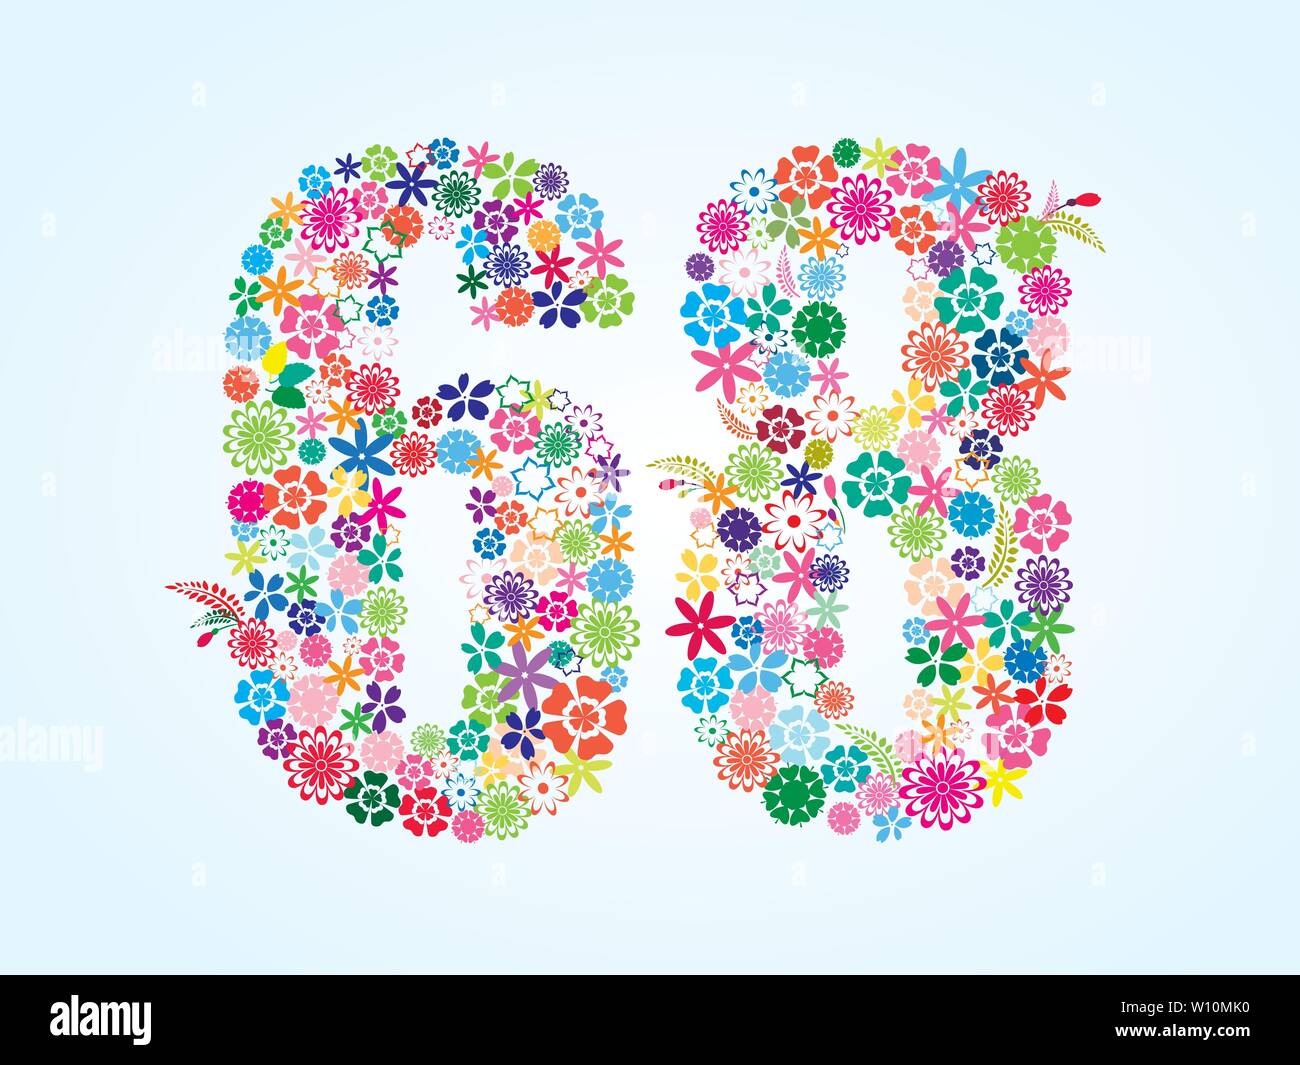 68 6 Stock Vector Images - Alamy